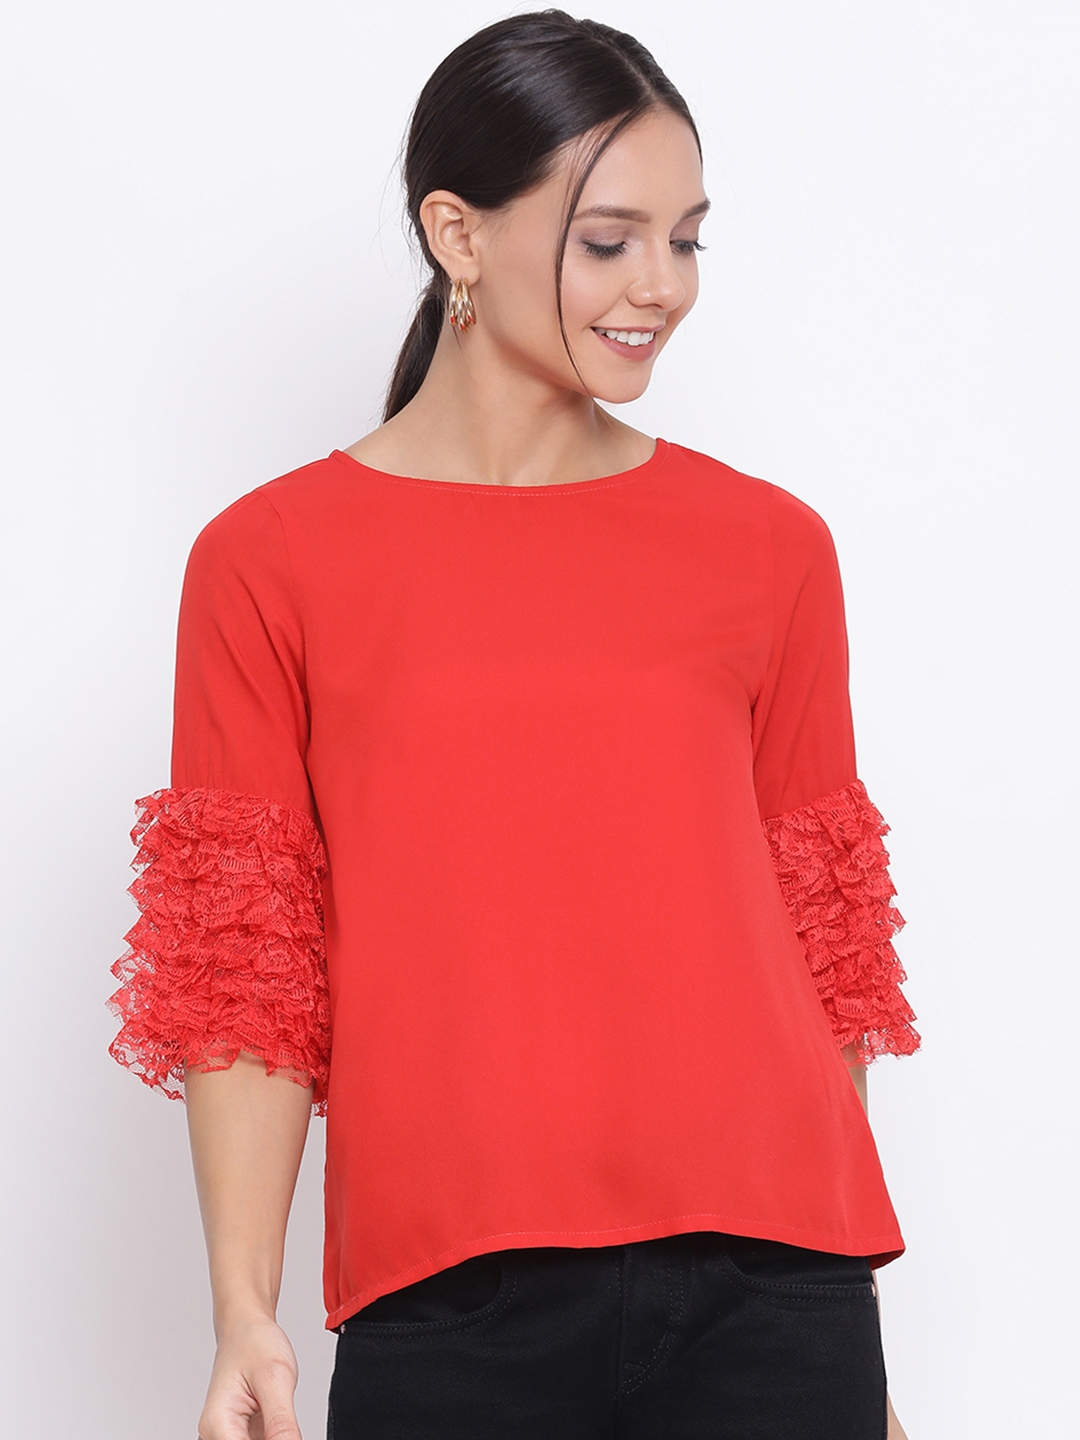 DRAAX fashions | Draax Fashions Women Red Solid Top with Net Sleeves